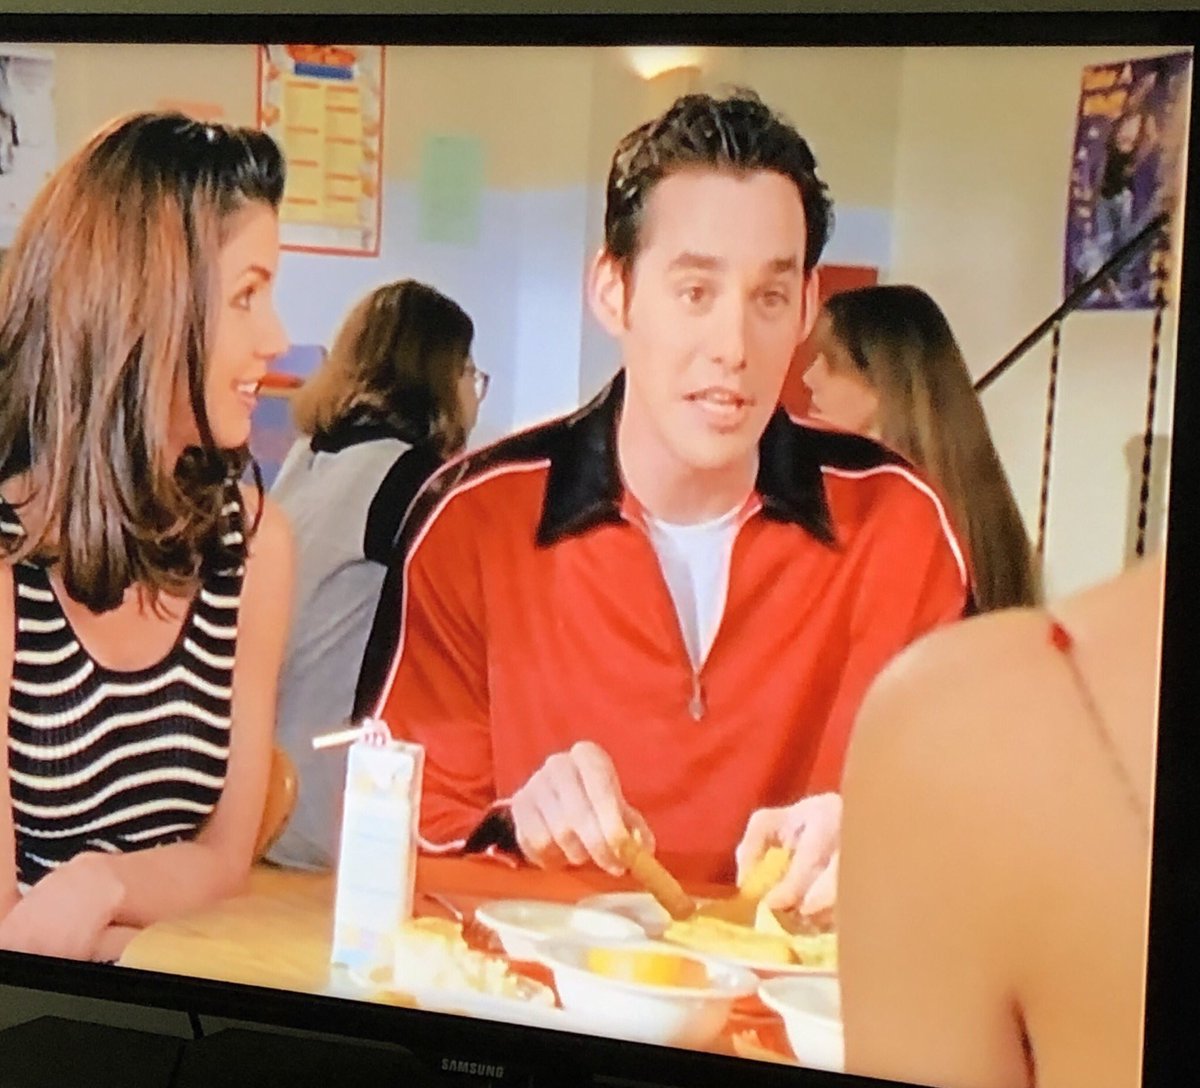 S2 E21 - Becoming, Part 1Can we please, please, PLEASE get a spin off where Xander reenacts things with fish sticks??? Also starring Seth Green??? #BuffyFirstWatch